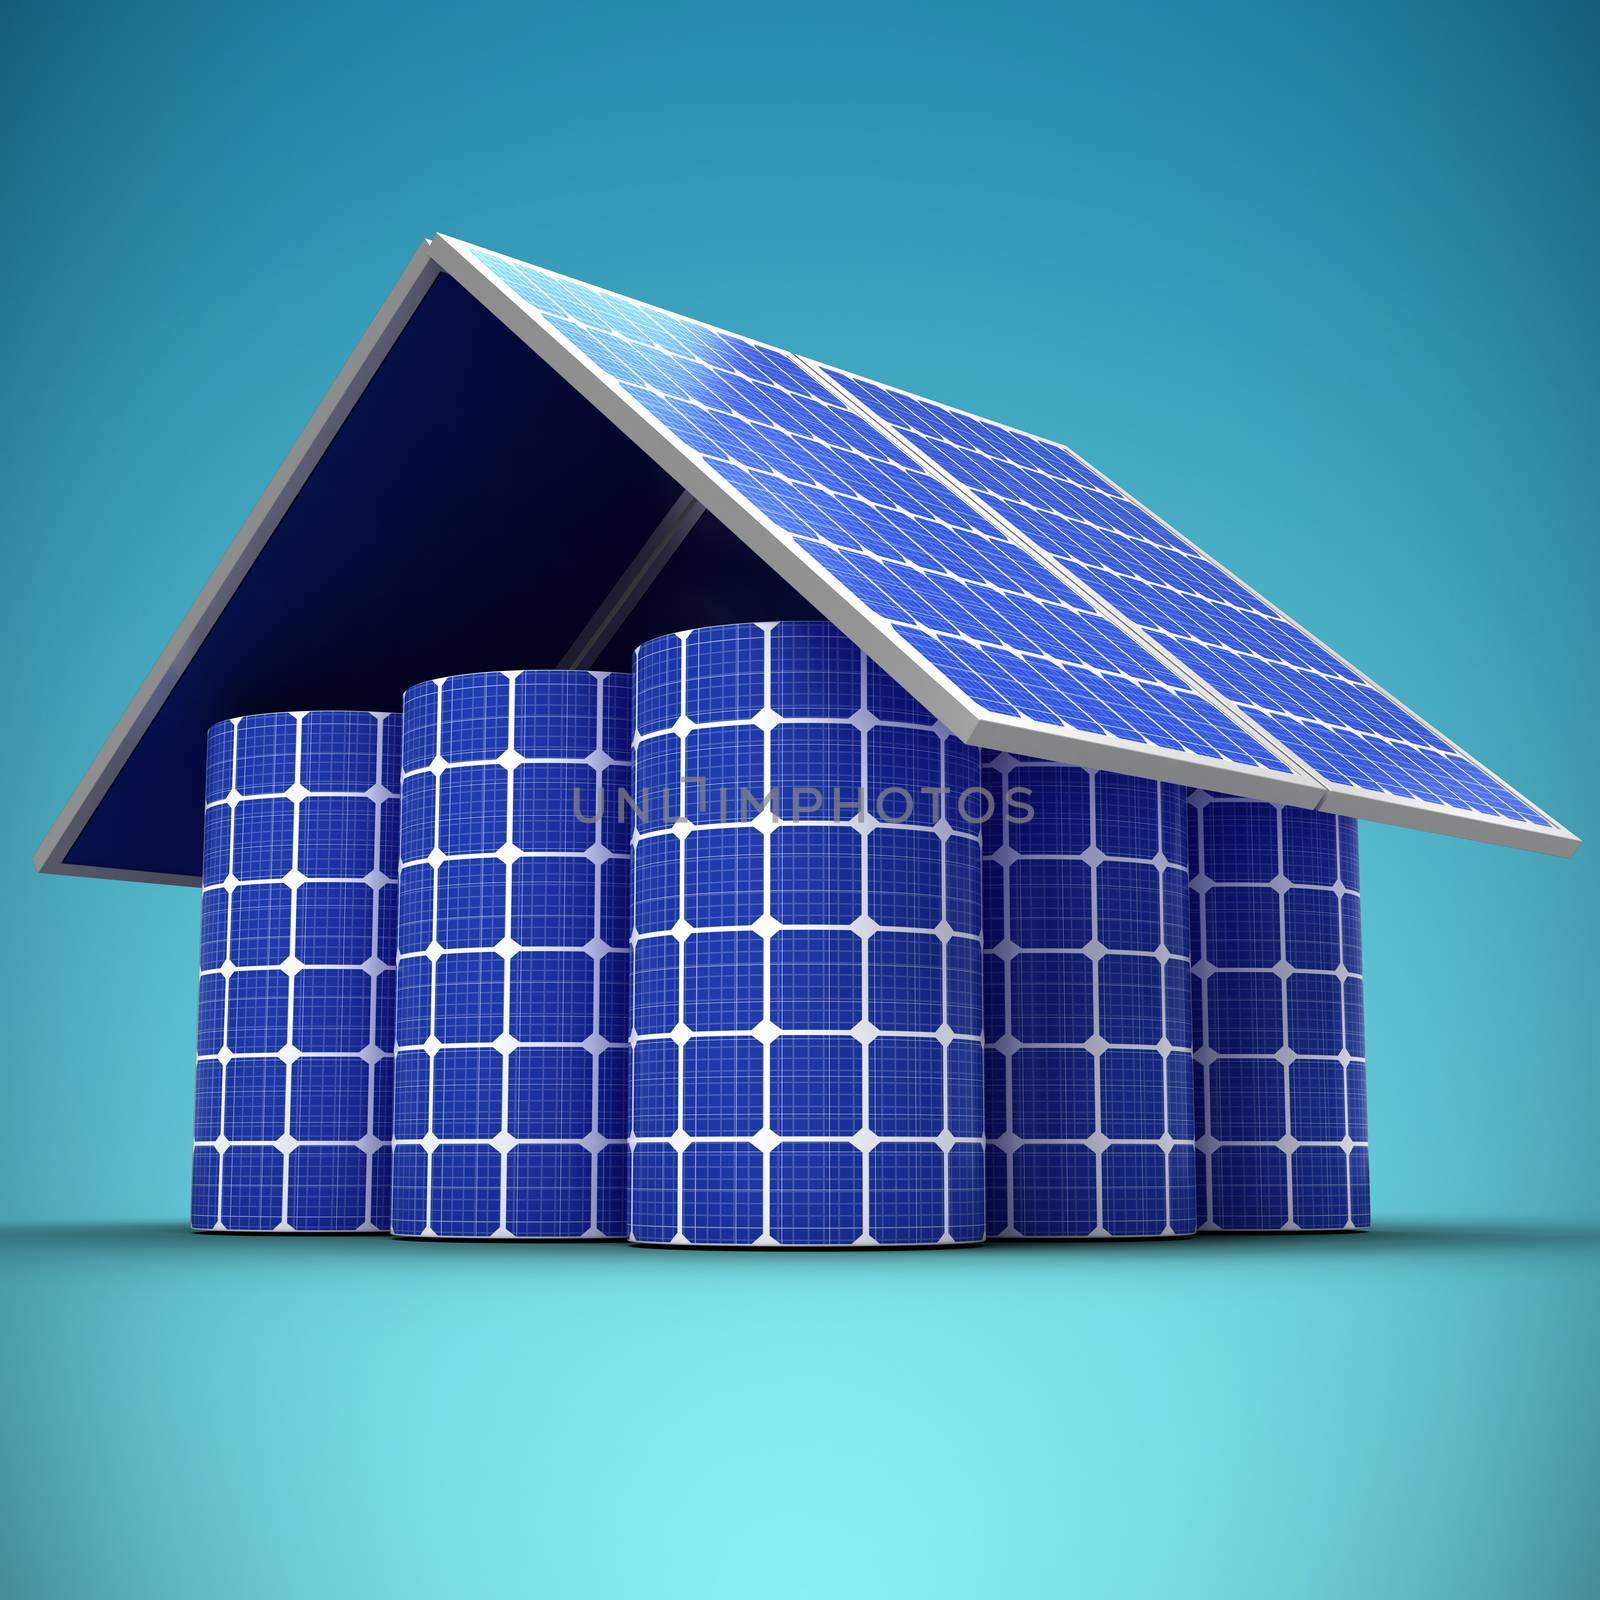 Composite image of 3d image of house made from solar panels and cells by Wavebreakmedia